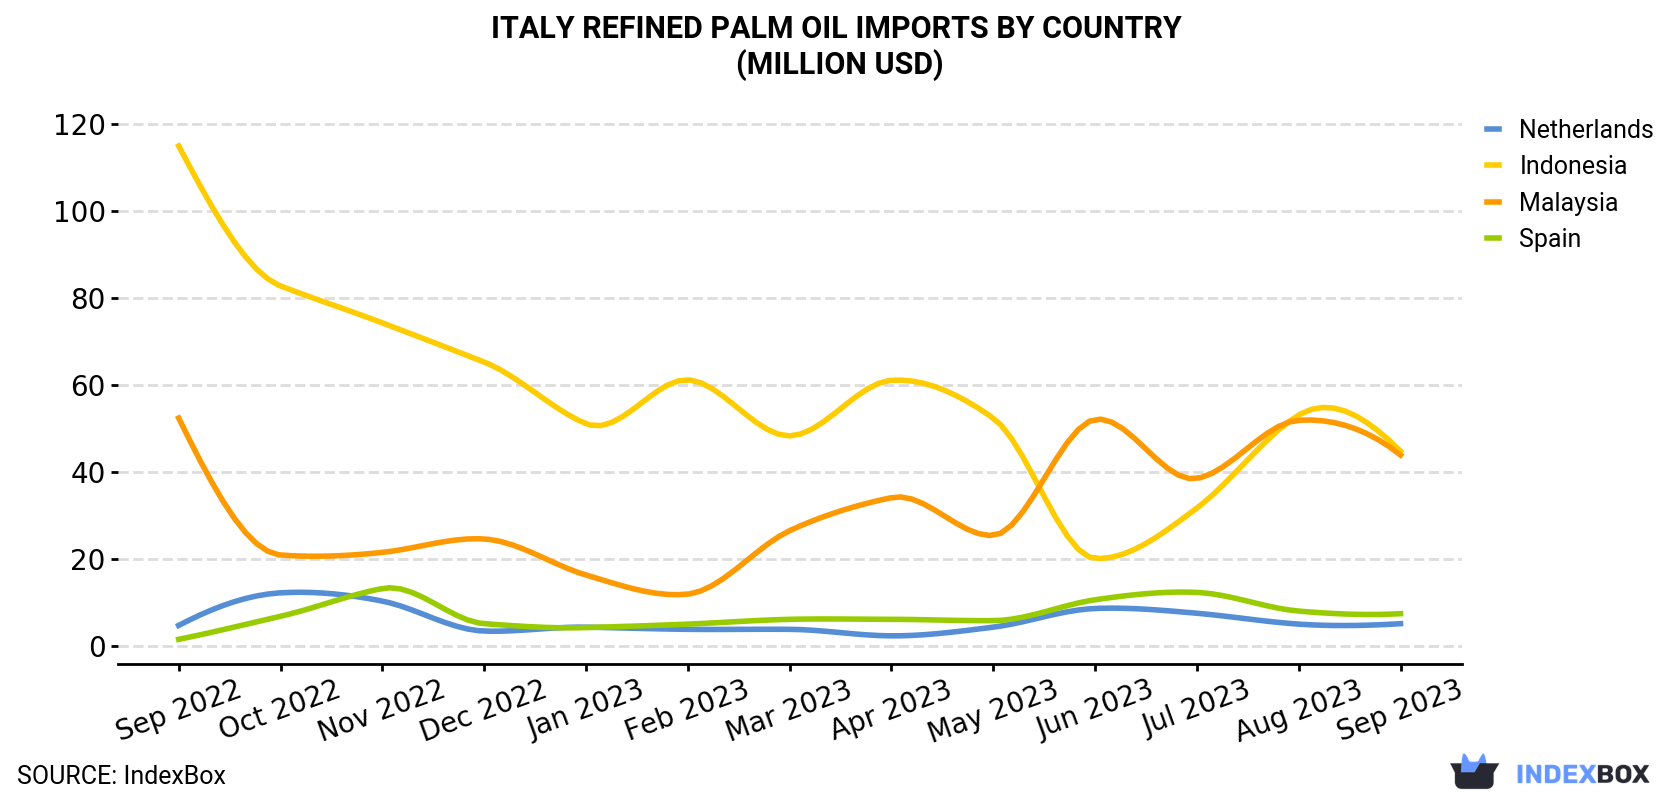 Italy Refined Palm Oil Imports By Country (Million USD)